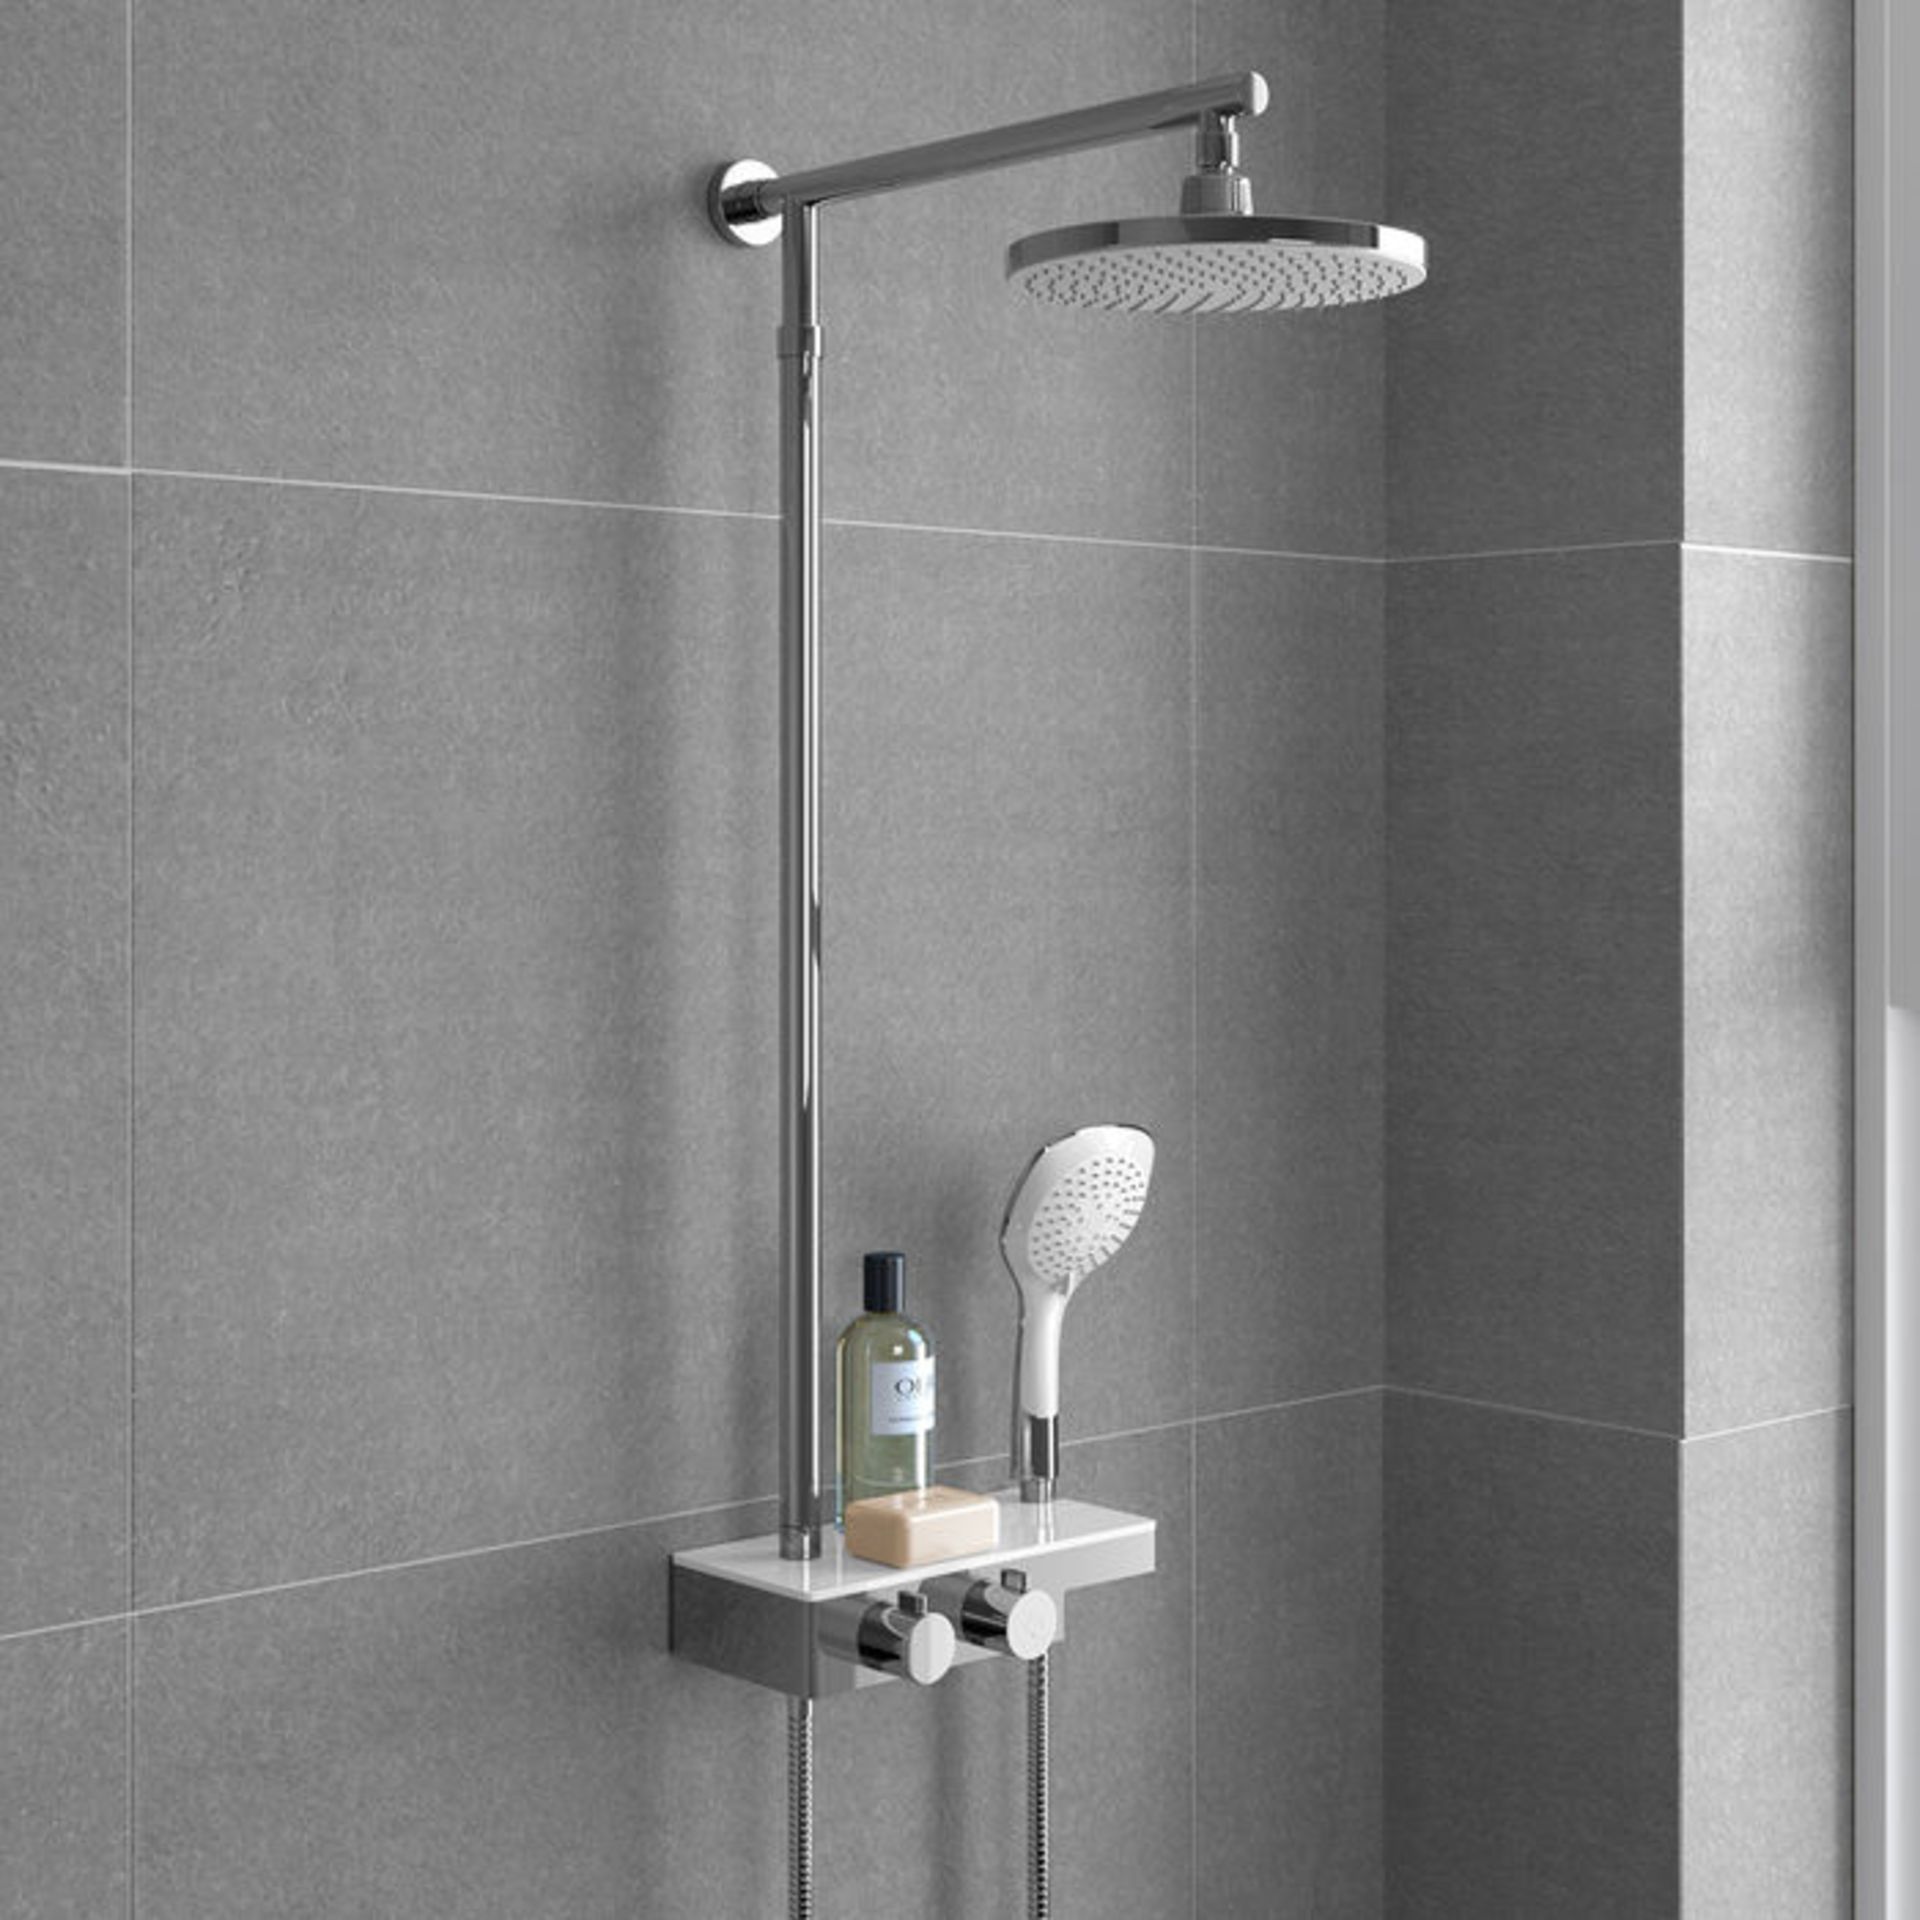 (MW41) Round Exposed Thermostatic Mixer Shower Kit Medium Head & Shelf. RRP £349.99. Cool to touch - Image 6 of 6